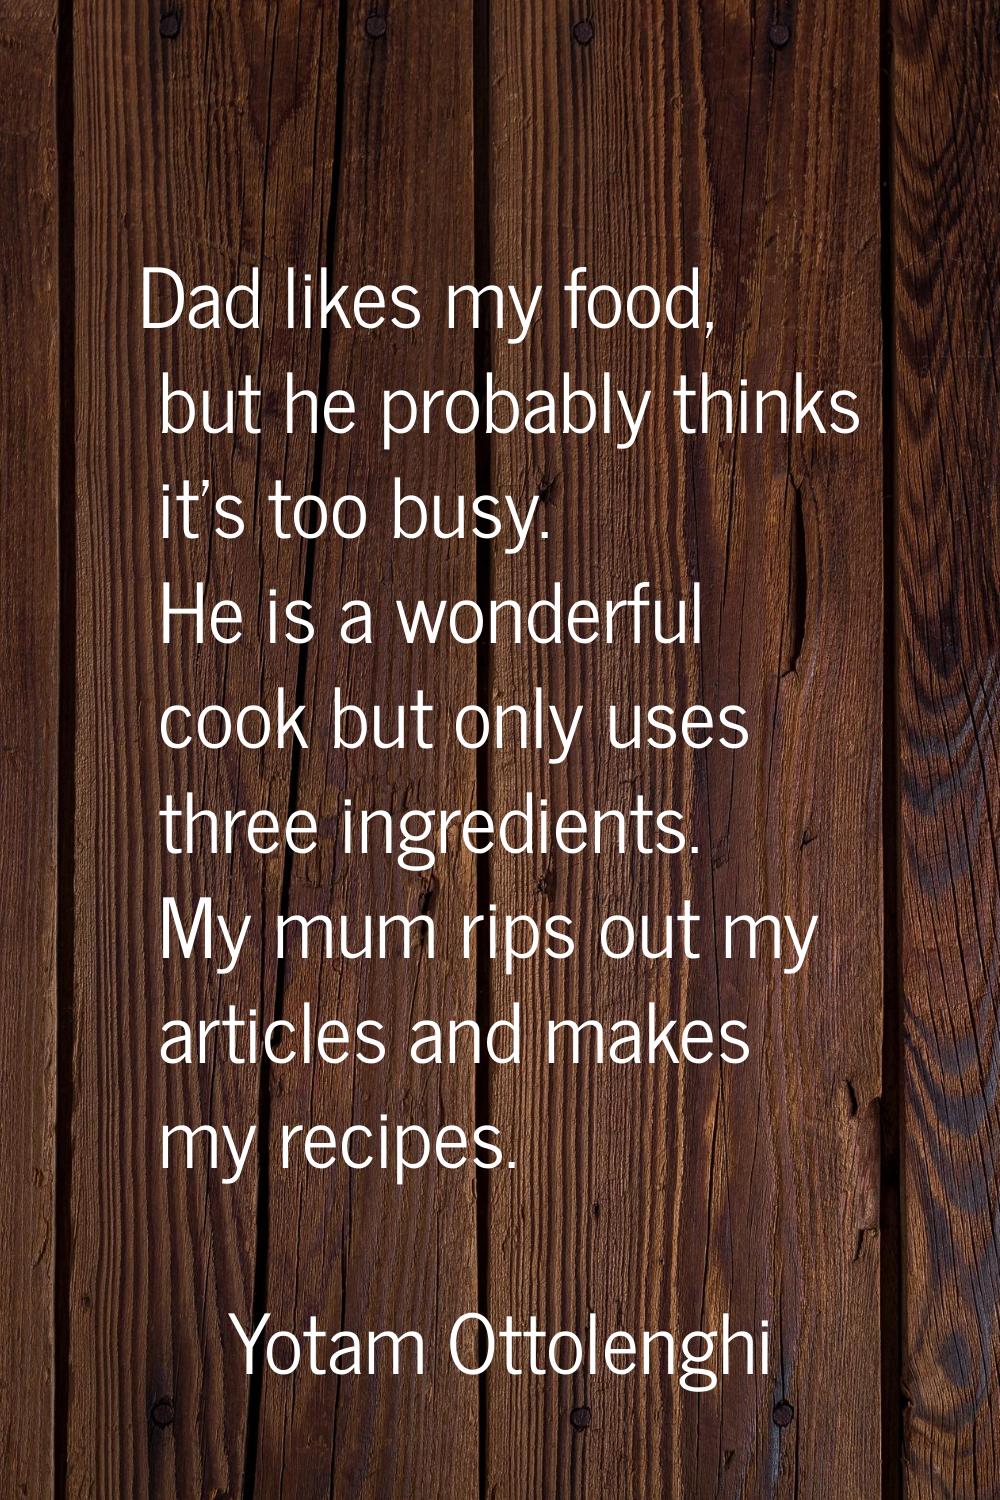 Dad likes my food, but he probably thinks it's too busy. He is a wonderful cook but only uses three